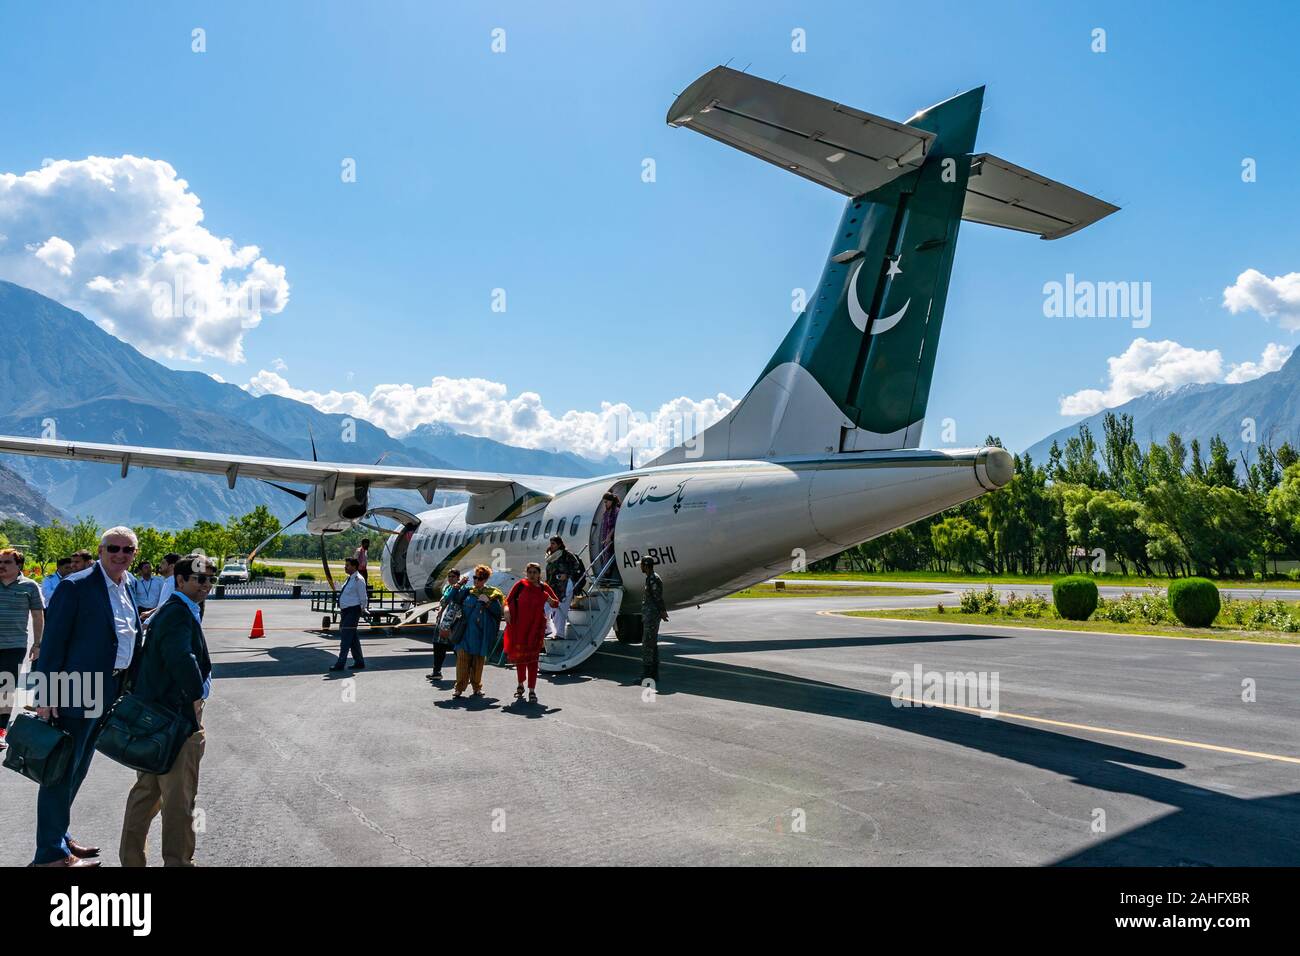 Gilgit Domestic Airport Pakistan Airlines Passengers are Exiting the Plane on a Sunny Blue Sky Day Stock Photo